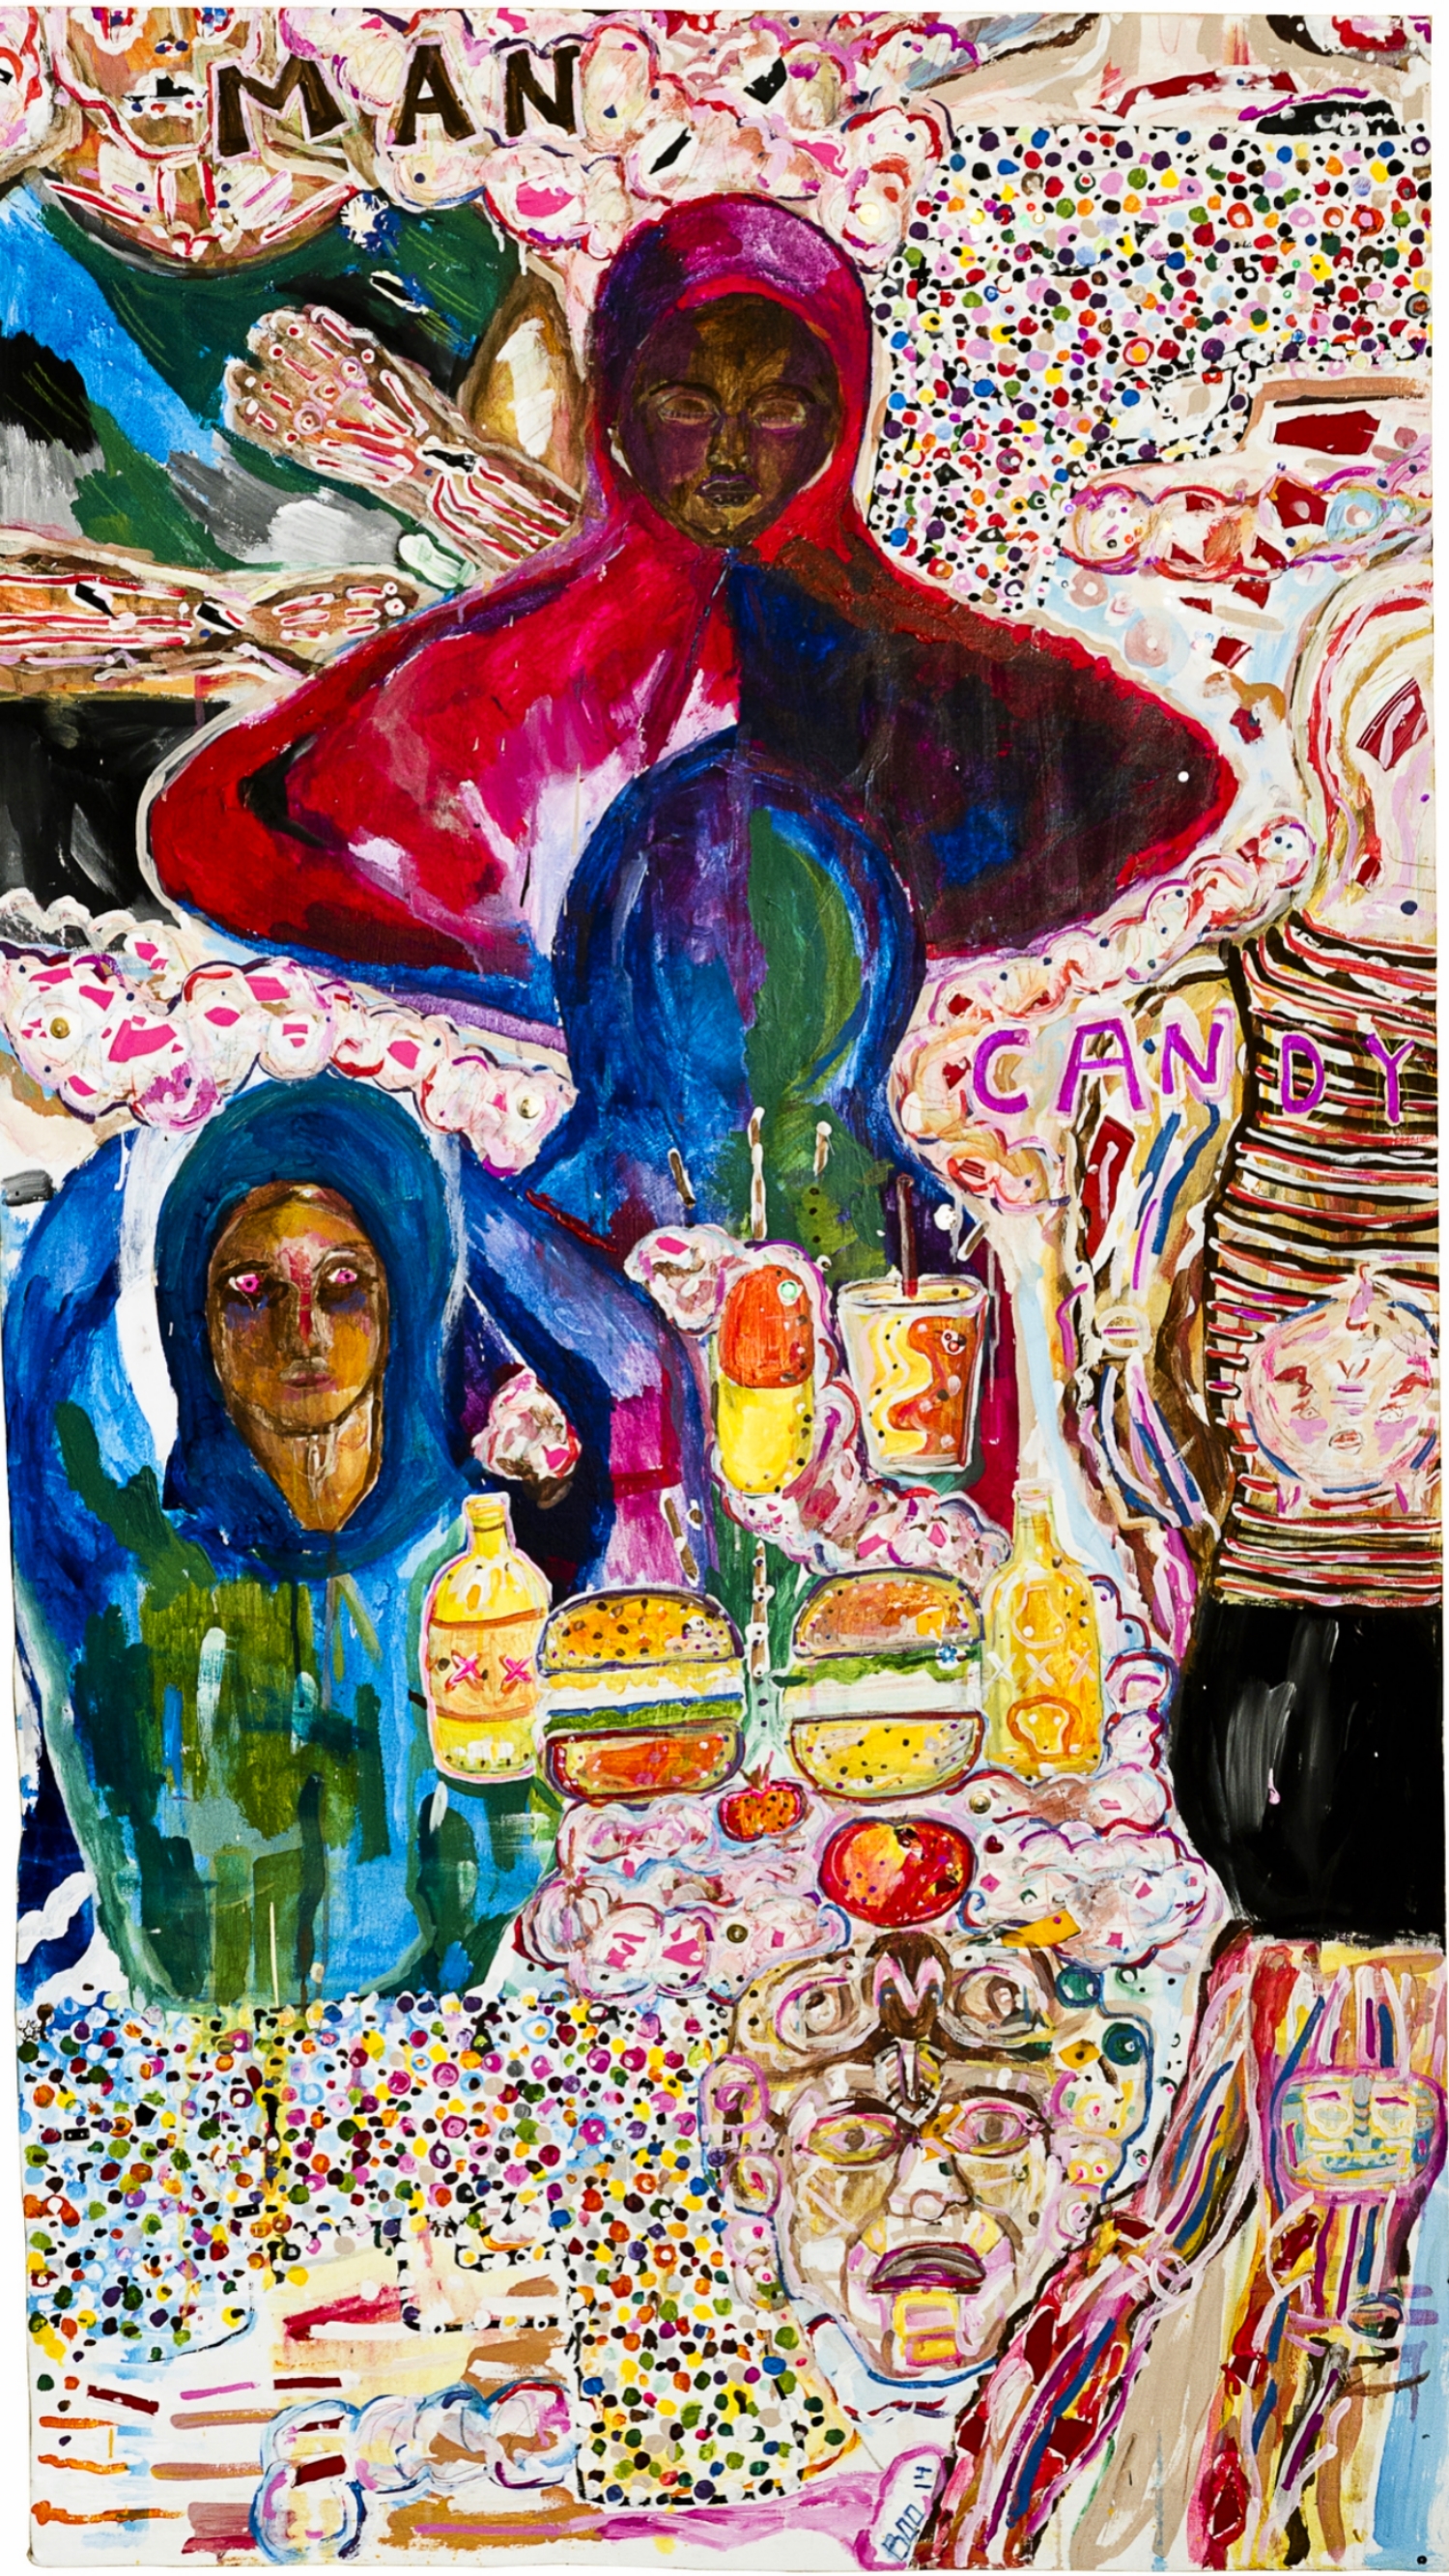  Candy Boy (for Trayvon and...), mixed media on canvas, 5ft x 3ft, 2014 